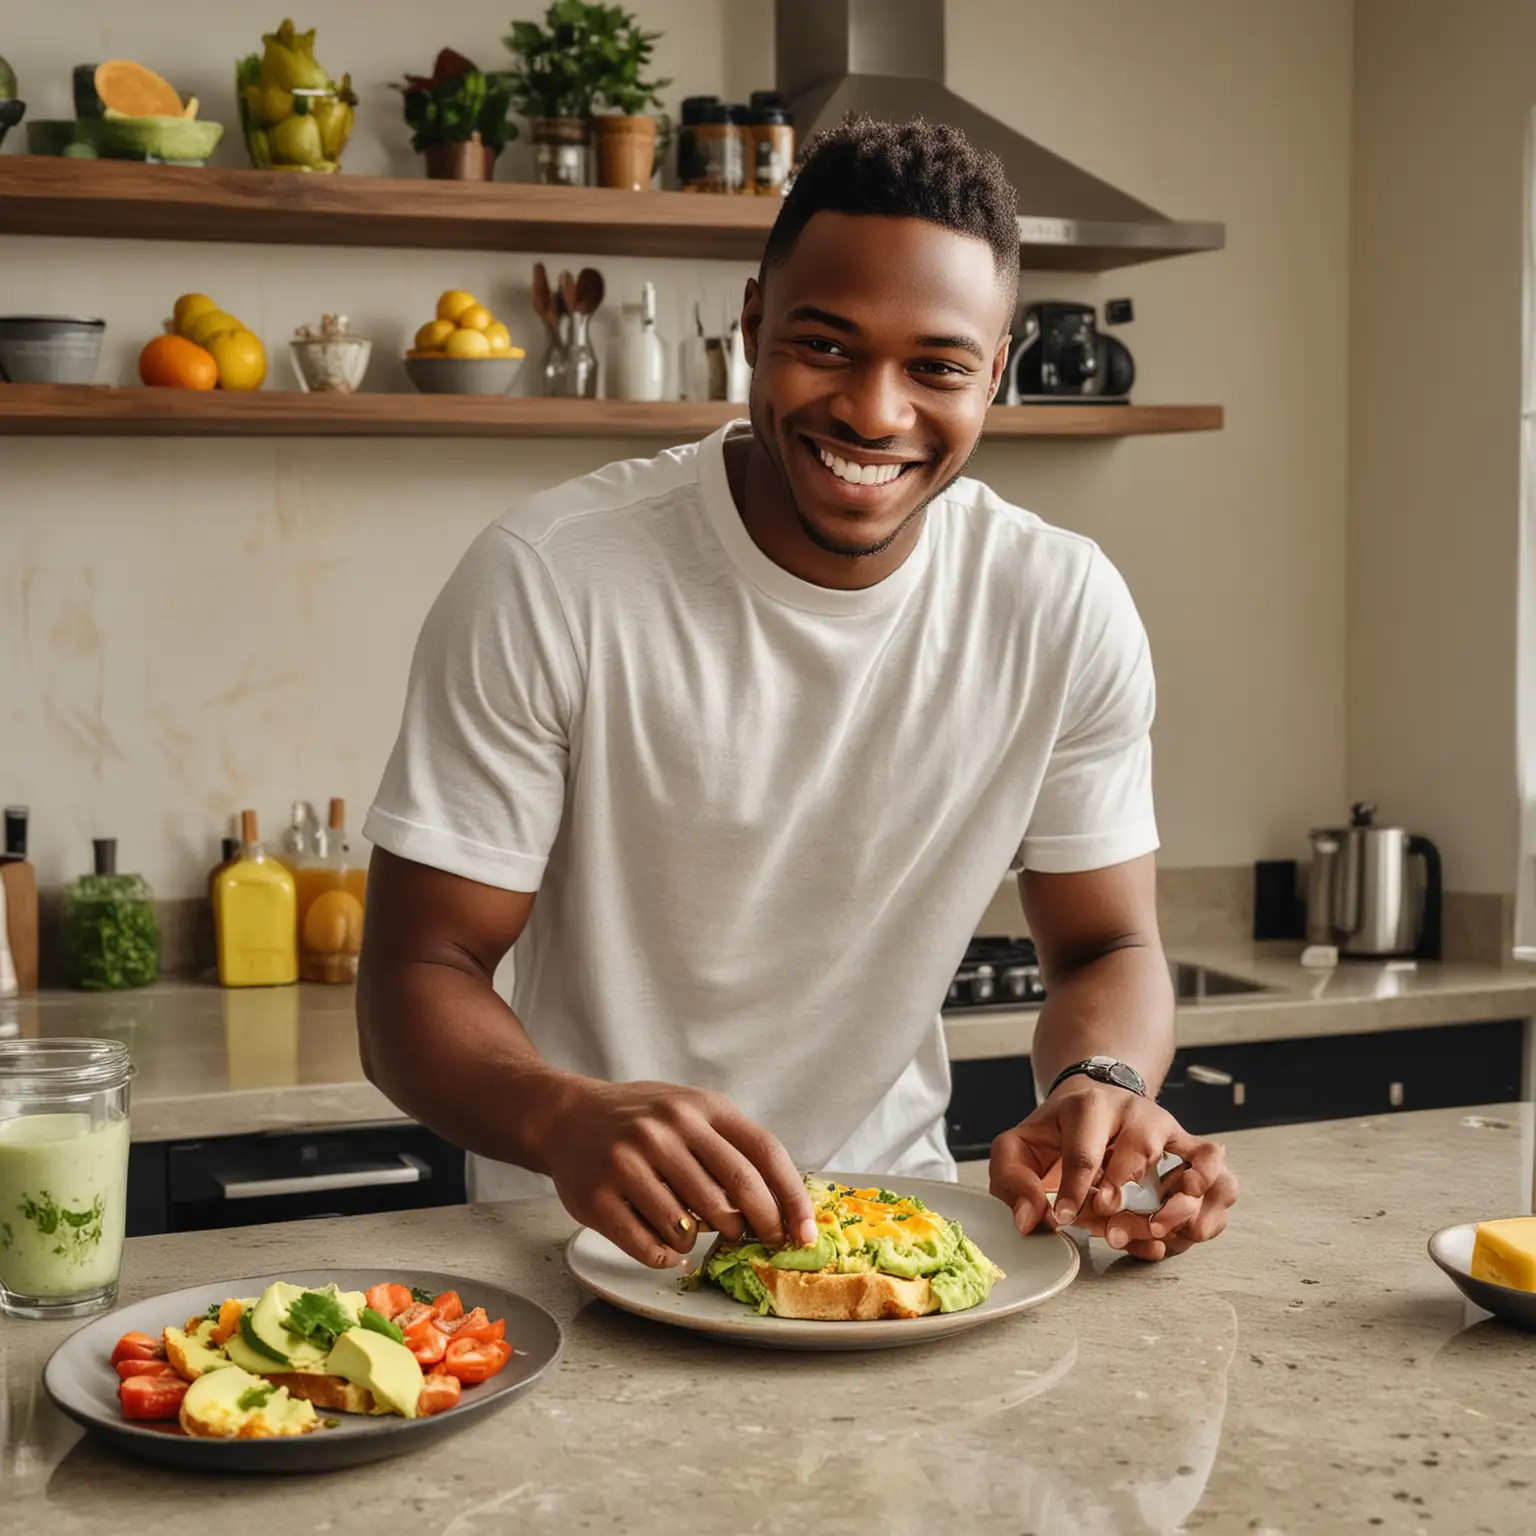 Athletic Cameroon man, 25 years old, big smile, in a sunny luxury modern condo kitchen. He wipes sauce off a plate of delicious avocado toast. There is a rice bowl and an omelet plated beside him on the quartz counter